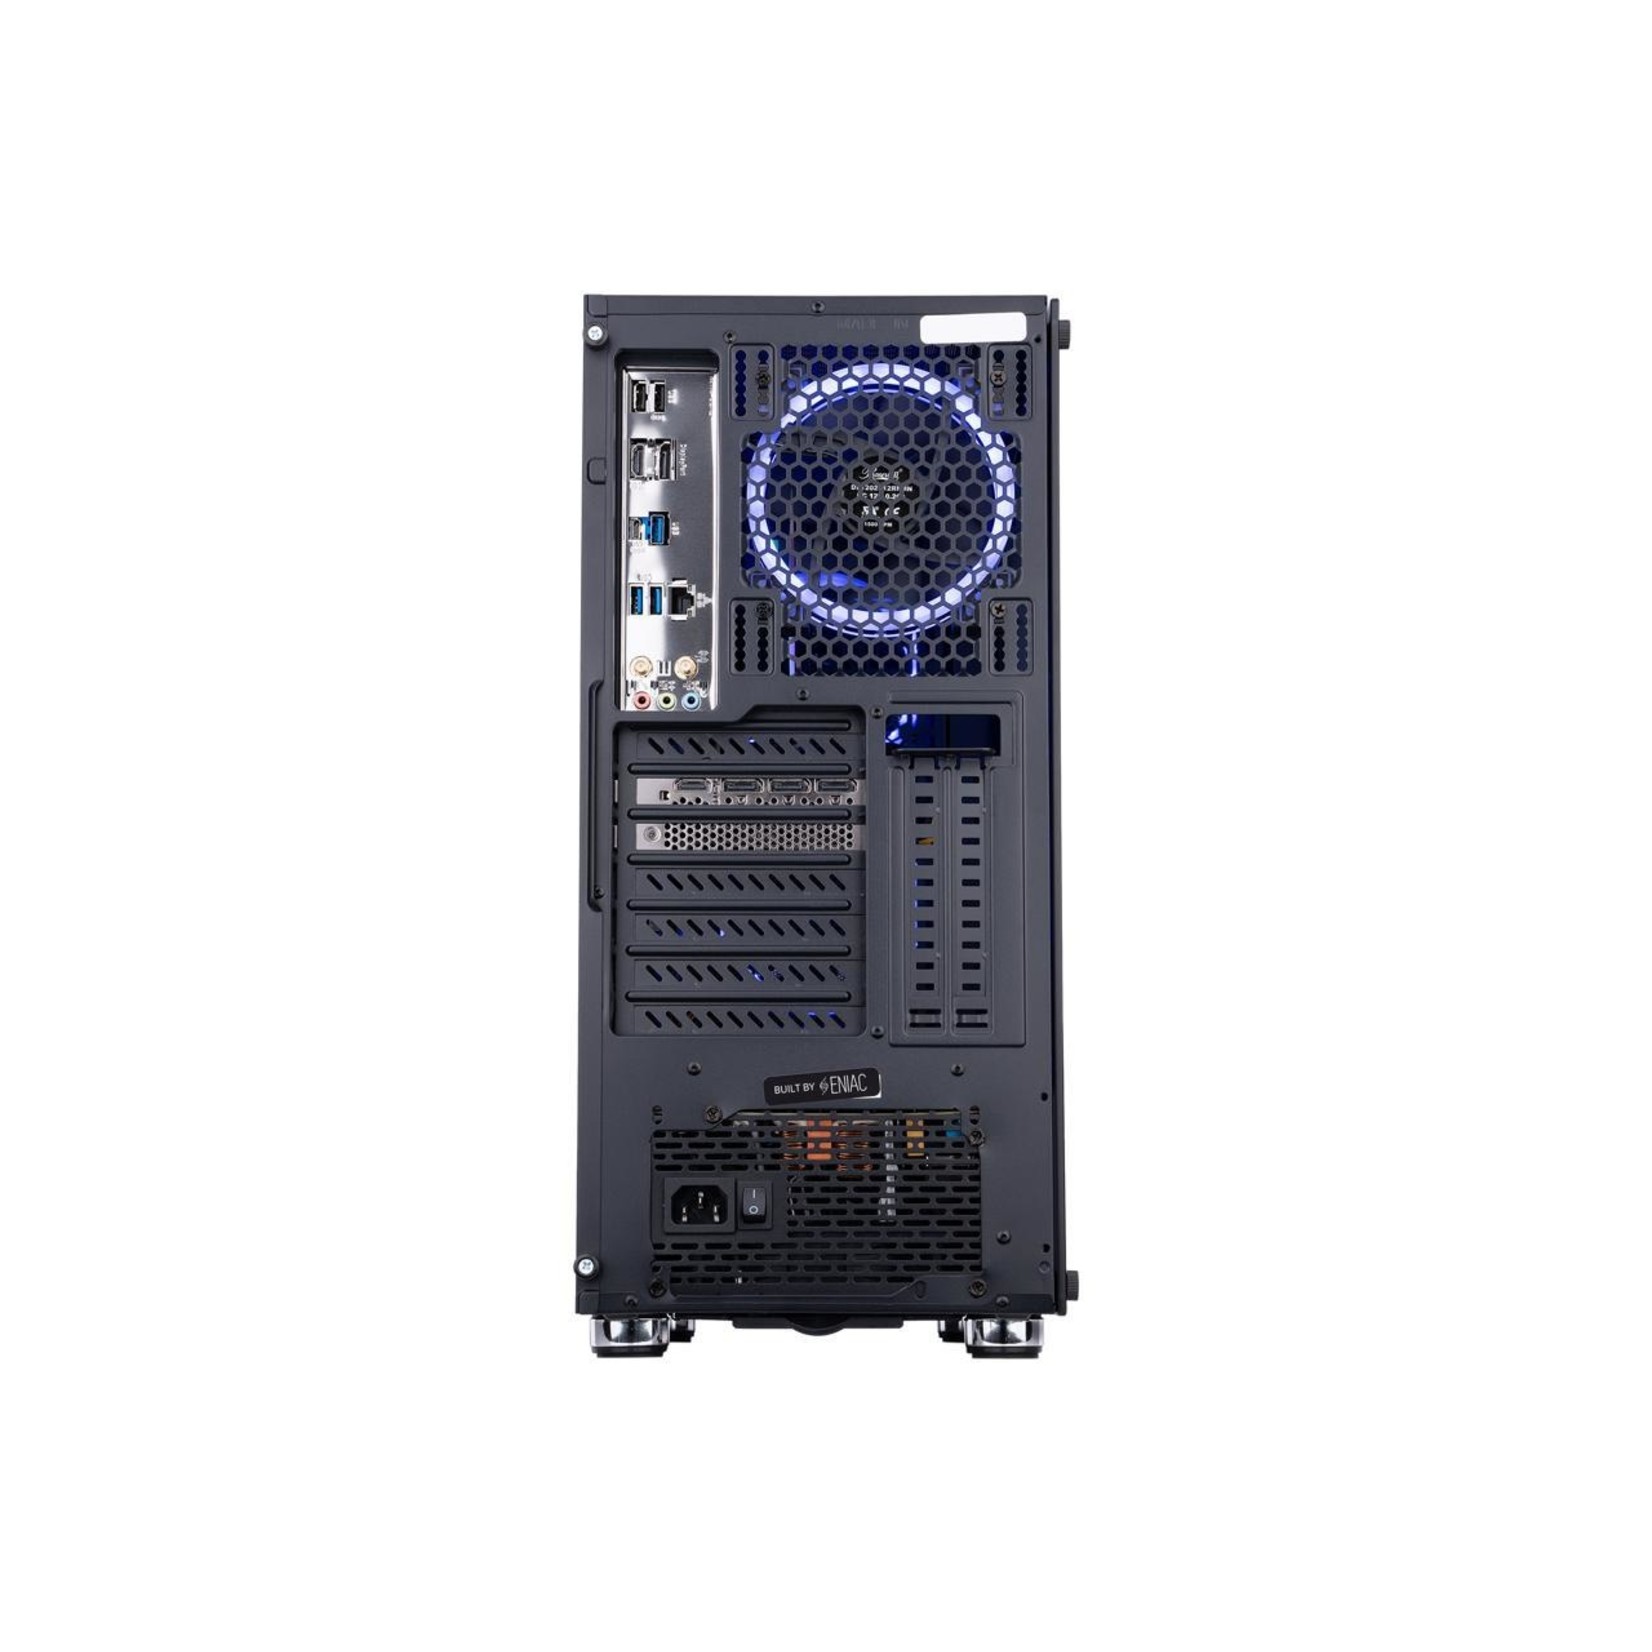 ABS ABS Master Gaming PC - GeForce RTX 3060 - Intel i5 11400F -  16GB DDR4 3000MHz - 512GB M.2 NVMe SSD - Windows 10 Home